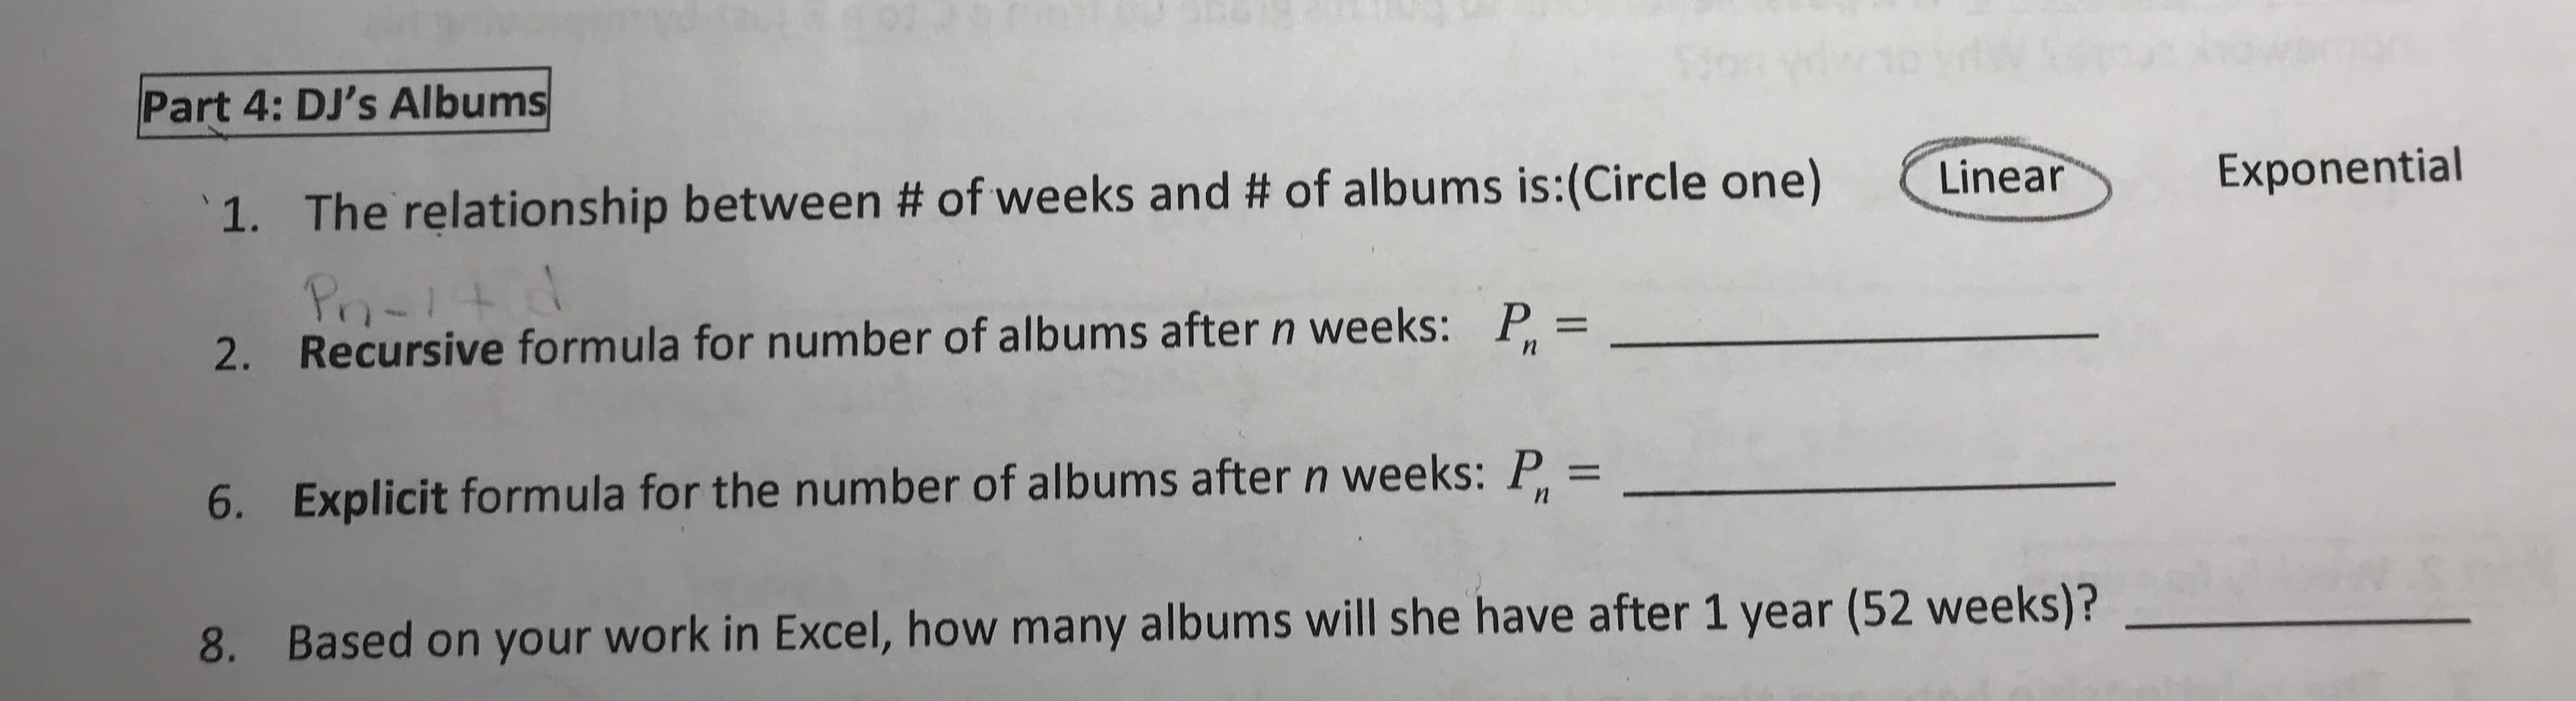 Part 4: DJ's Albums
The relationship between # of weeks and # of albums is:(Circle one)
Linear
Exponential
1.
Po-itid
Recursive formula for number of albums after n weeks:
2.
P =
Explicit formula for the number of albums after n weeks: P =
6.
%3D
Based on your work in Excel, how many albums will she have after 1 year (52 weeks)?
8.
